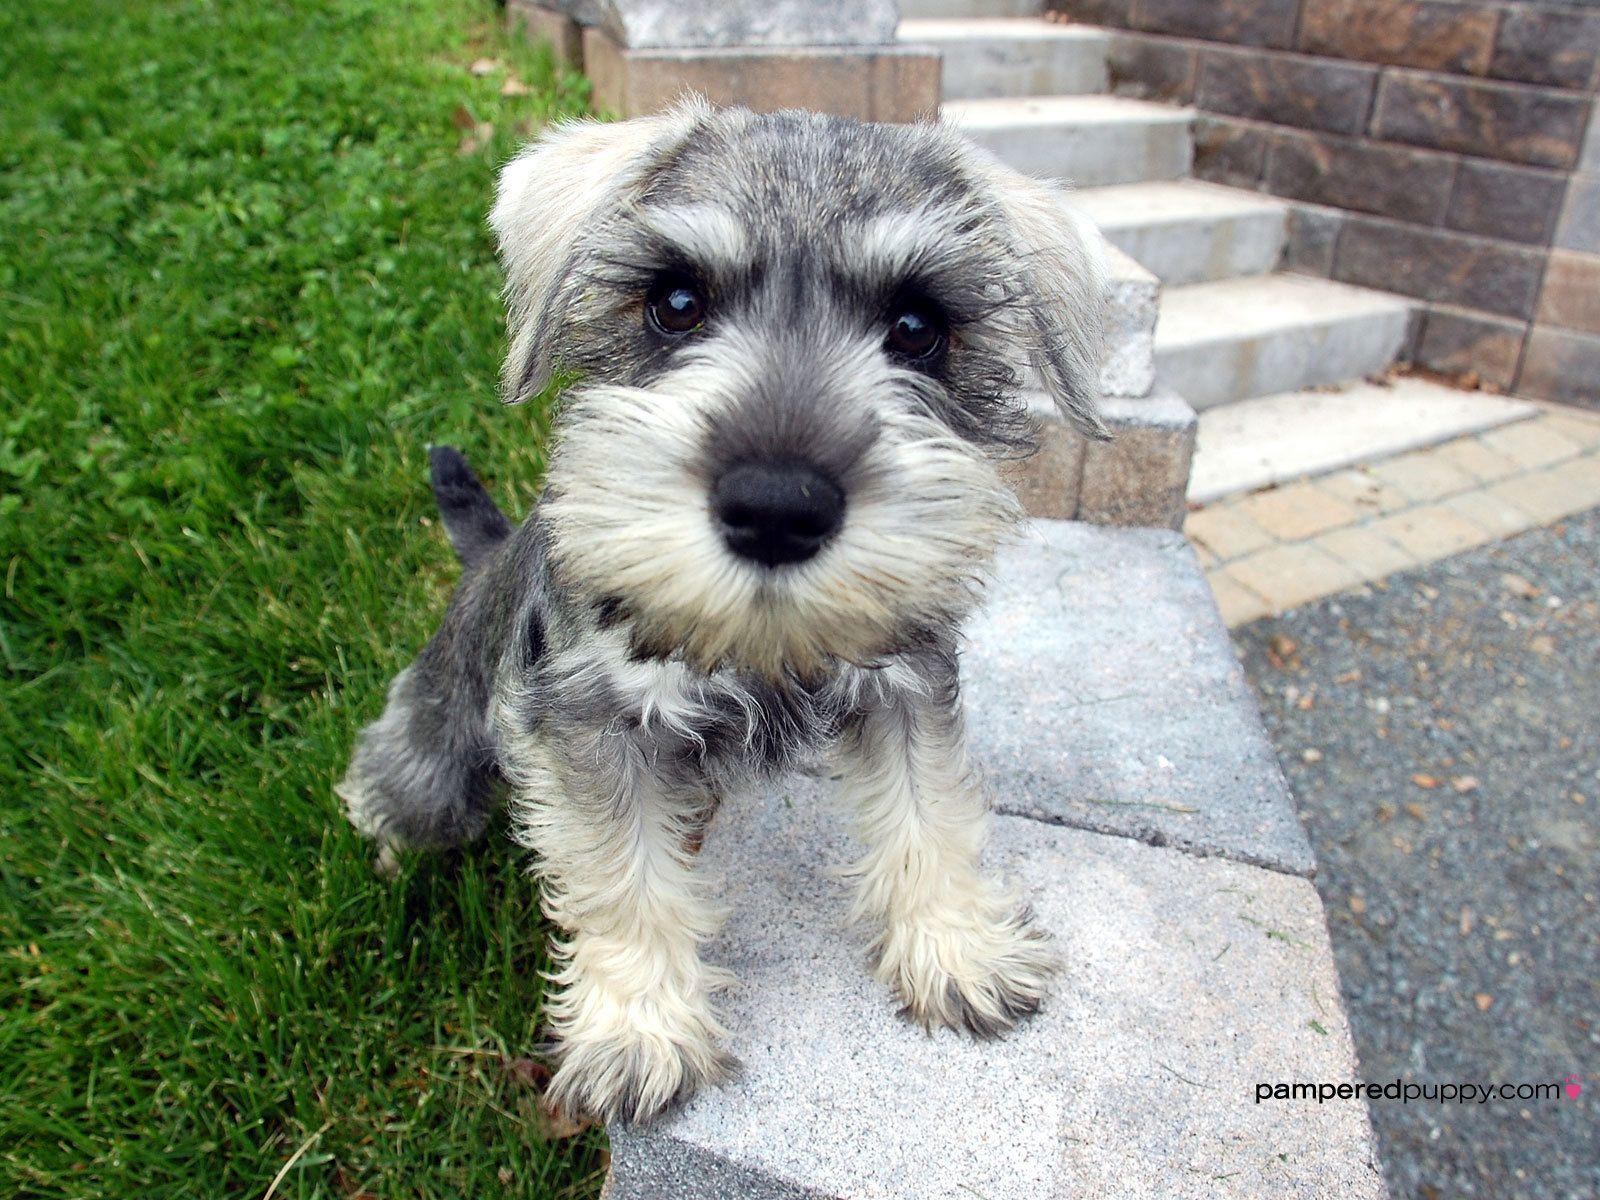 THIS is the dog I want someday. Teacup miniature Schnauzer. Look